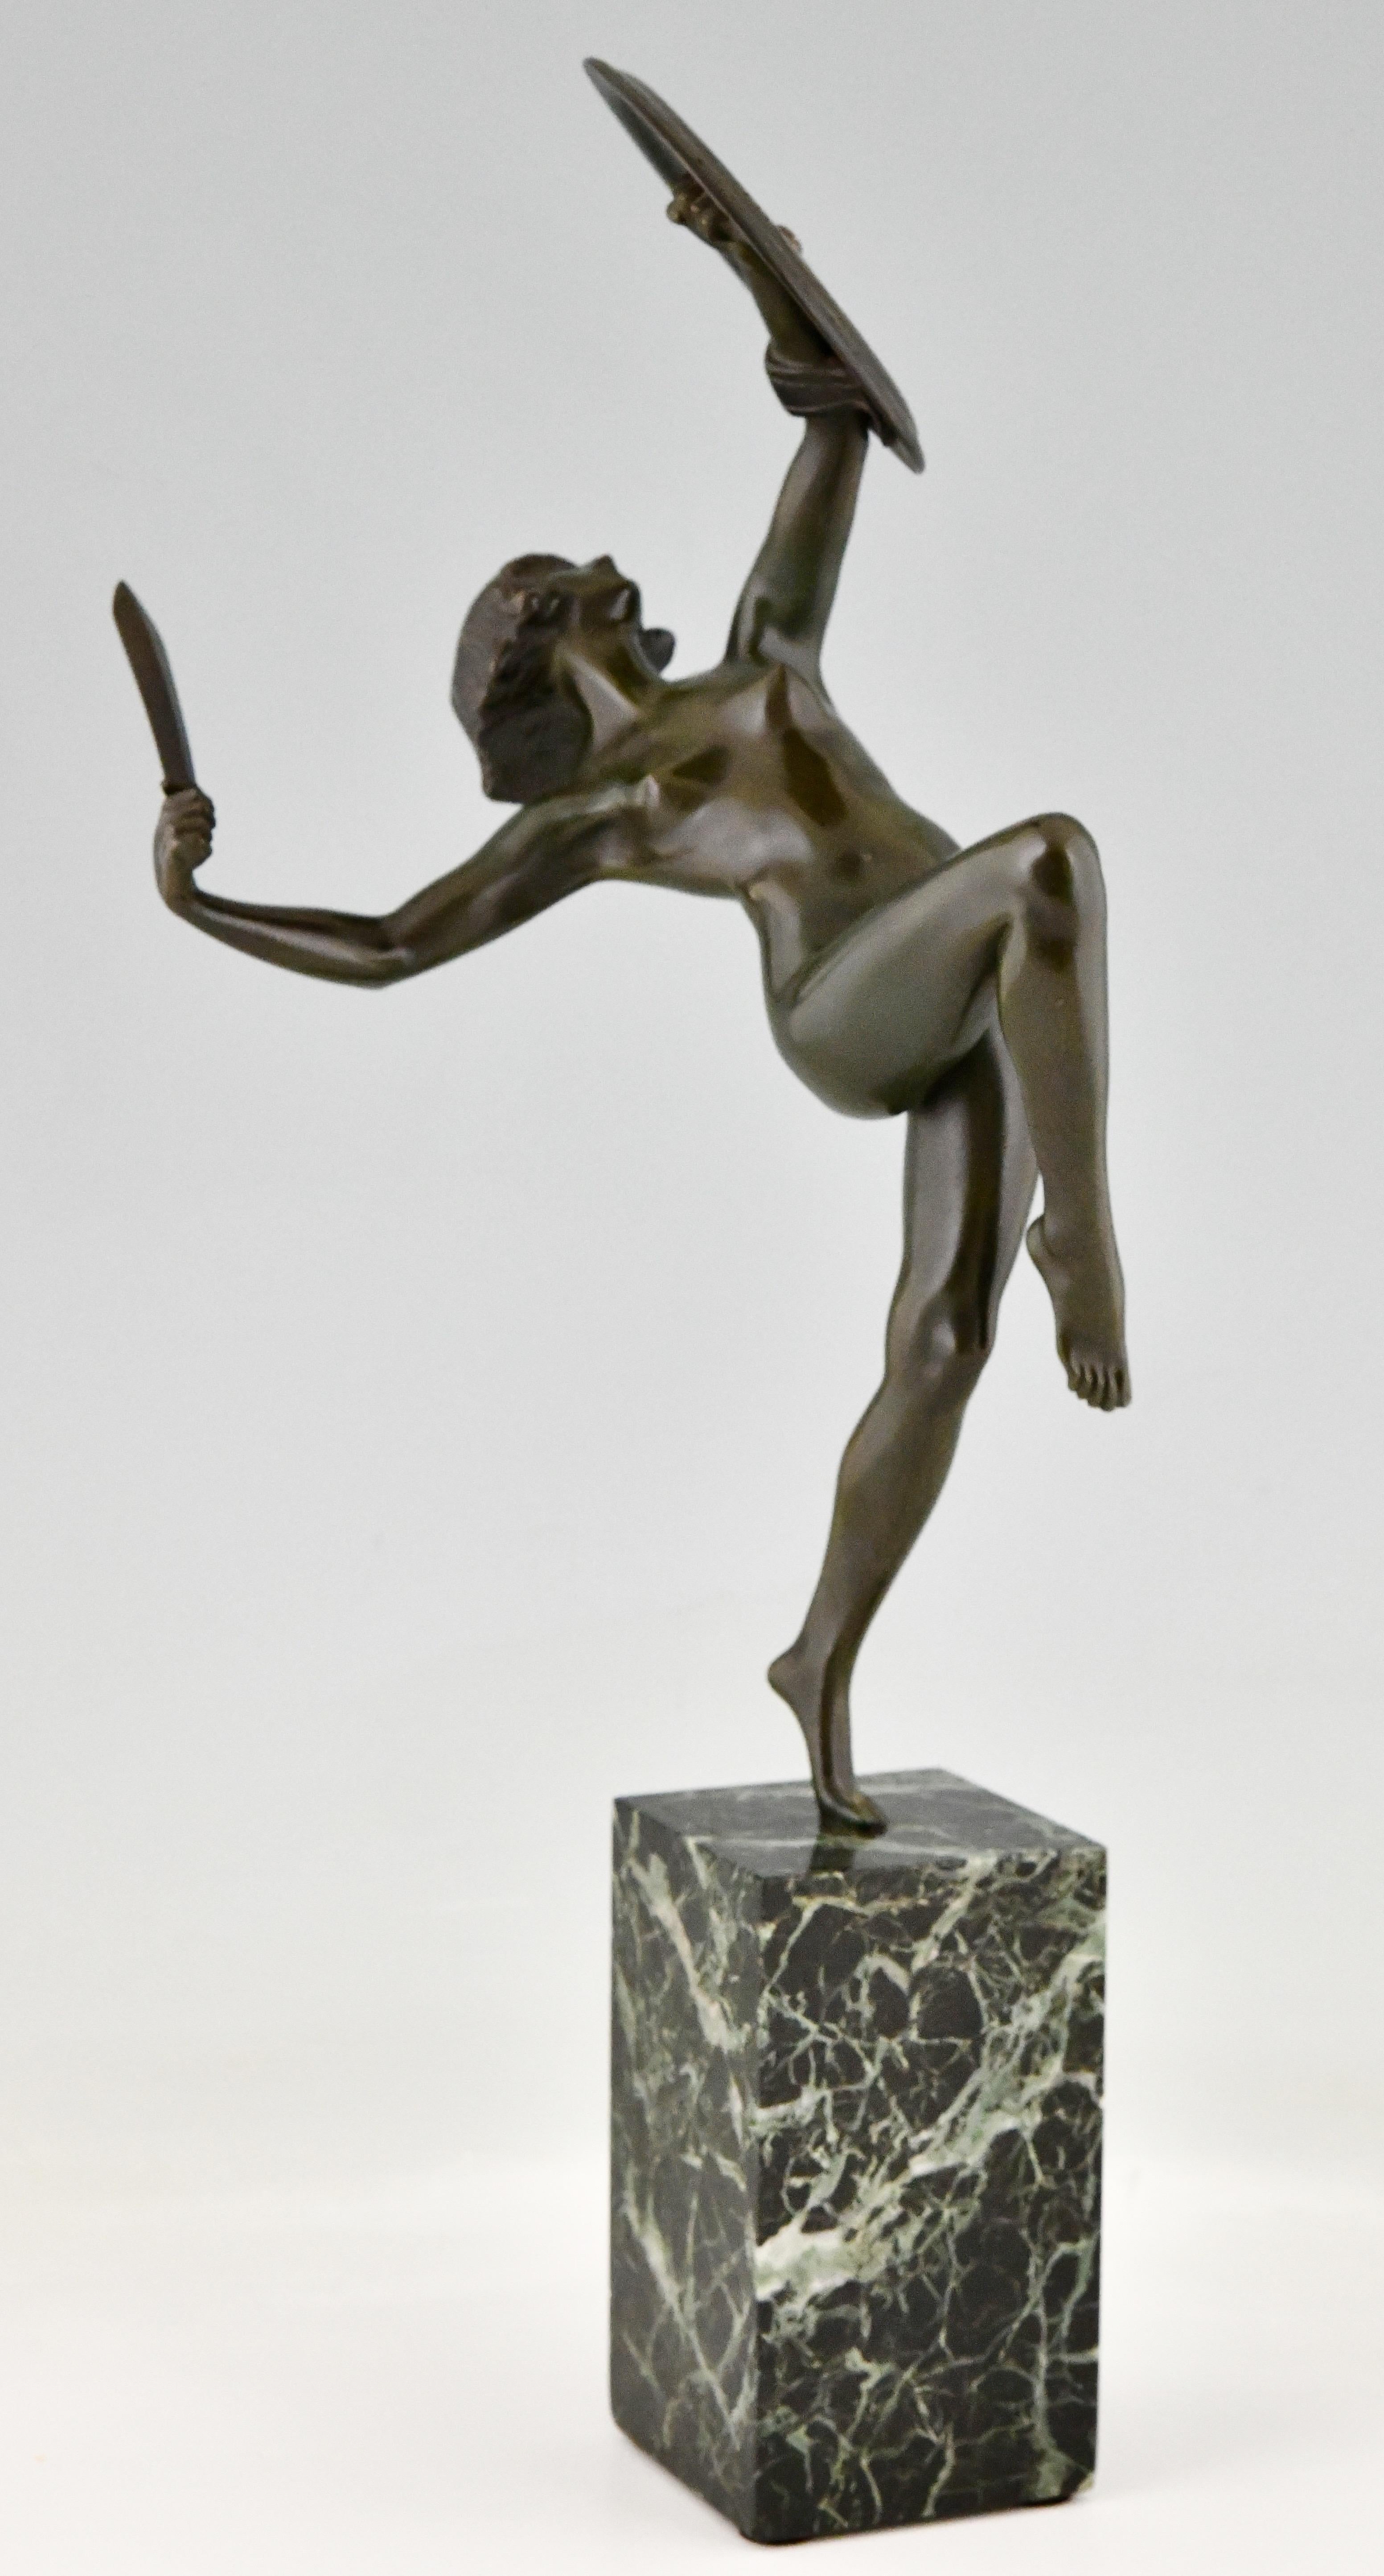 Art Deco bronze sculpture nude dagger dancer by Pierre Le Faguays, France 1930. Patinated bronze on green marble base. A female nude standing on one leg, holding a dagger in one hand. In her other hand she is holding a decorated shield. 
This